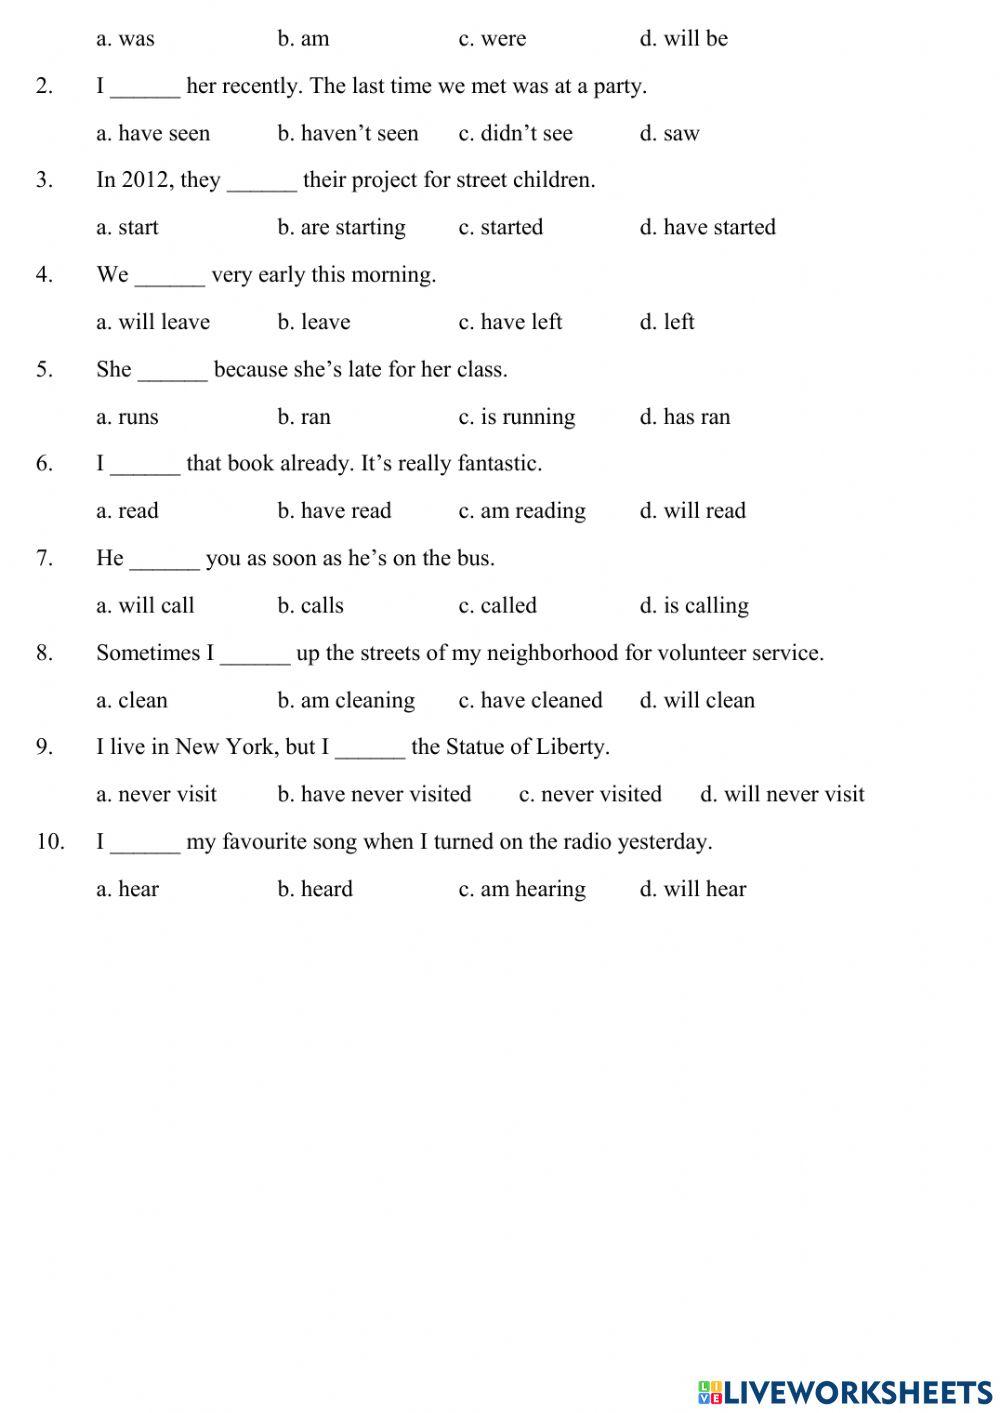 Tieng Anh 7 - Unit 3 exercises (MLH) (1)